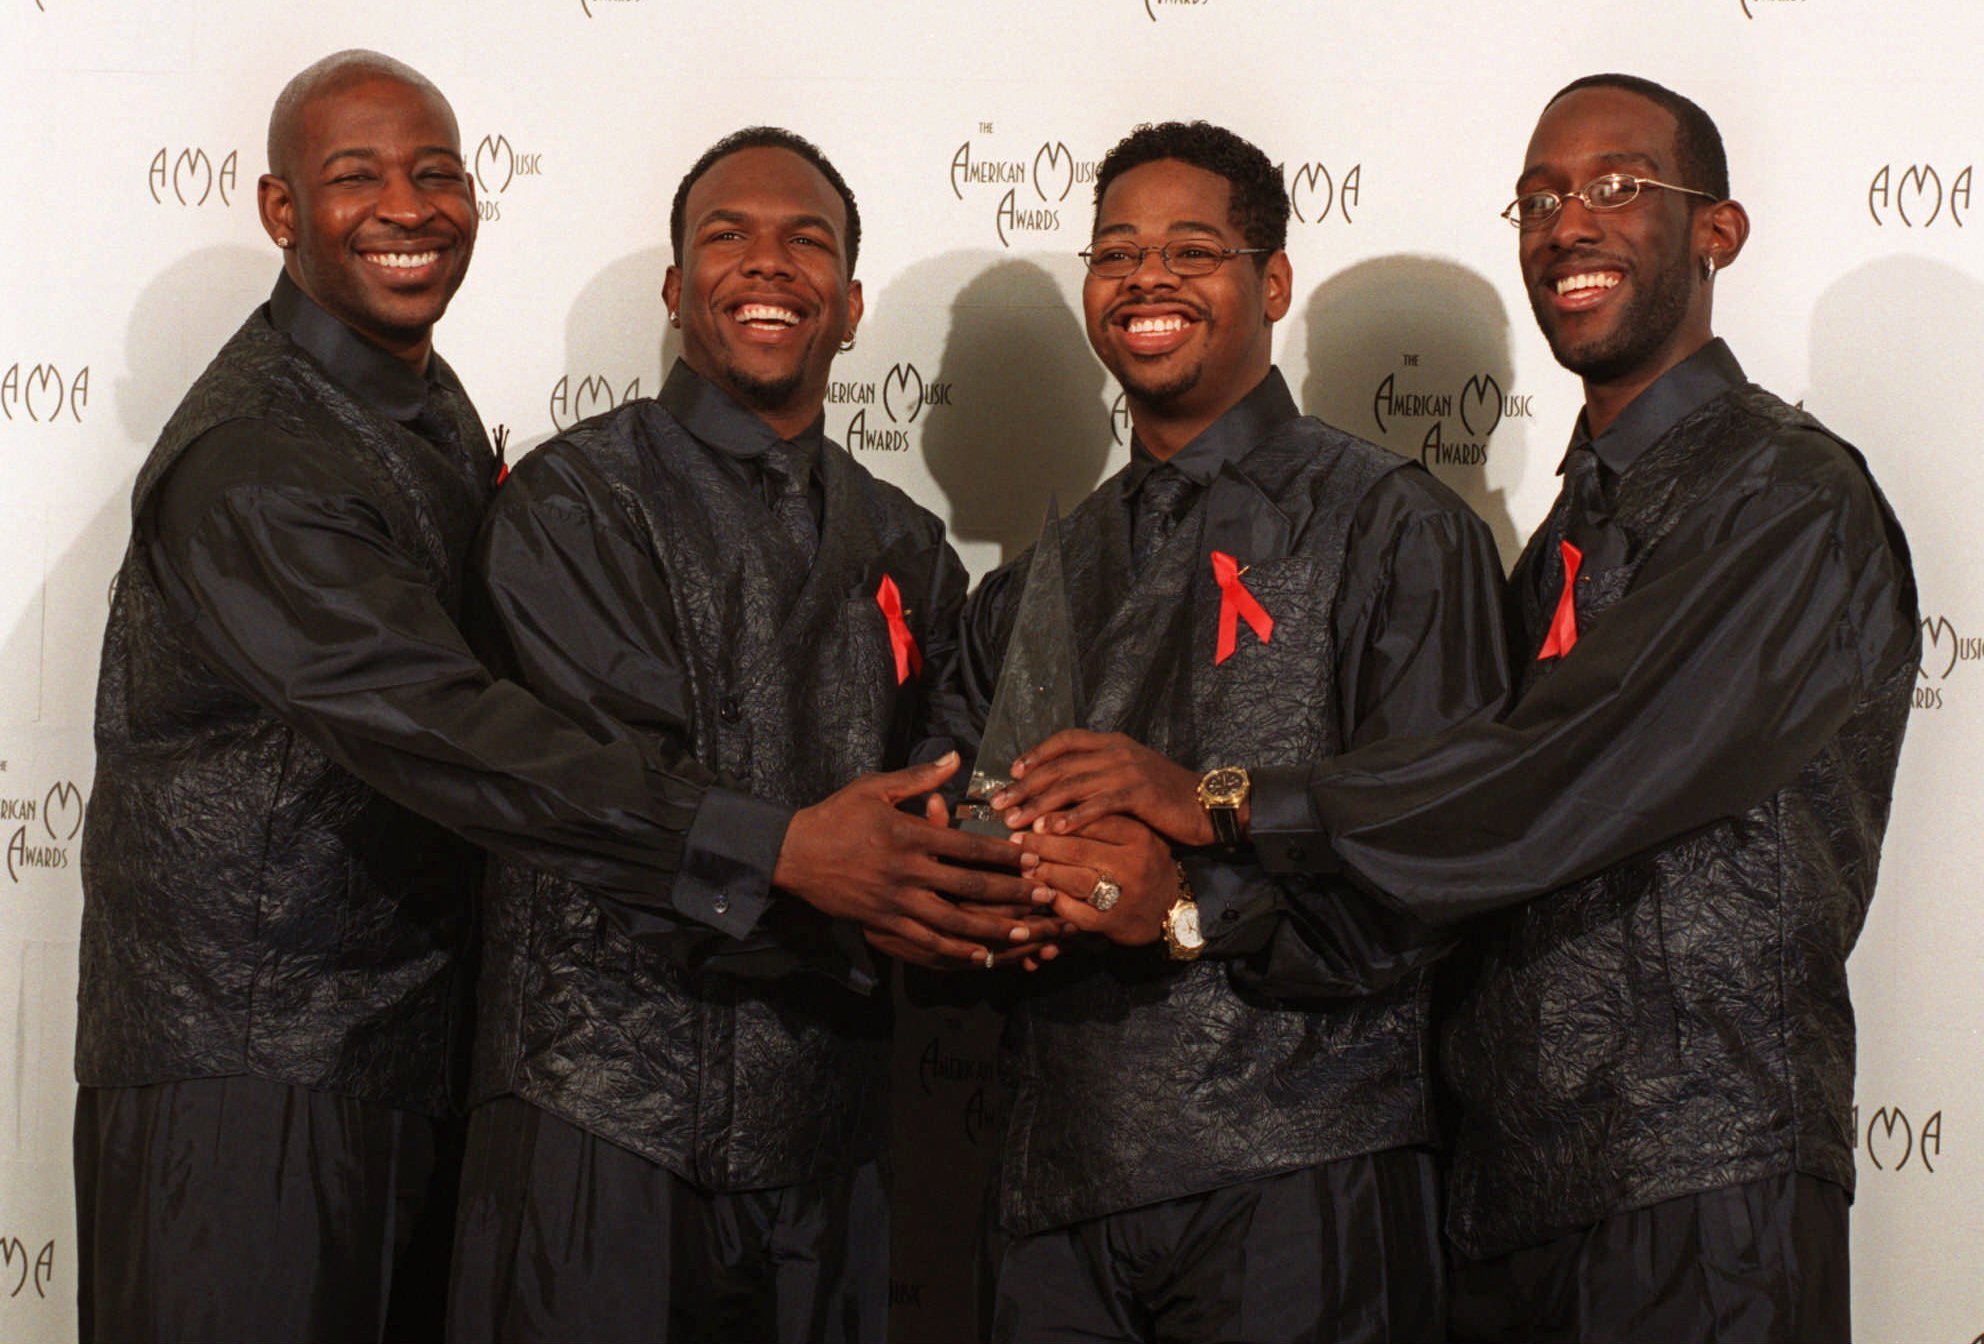 The R&B chart-topper rose to fame in the 1990s as a member of the iconic group Boyz II Men